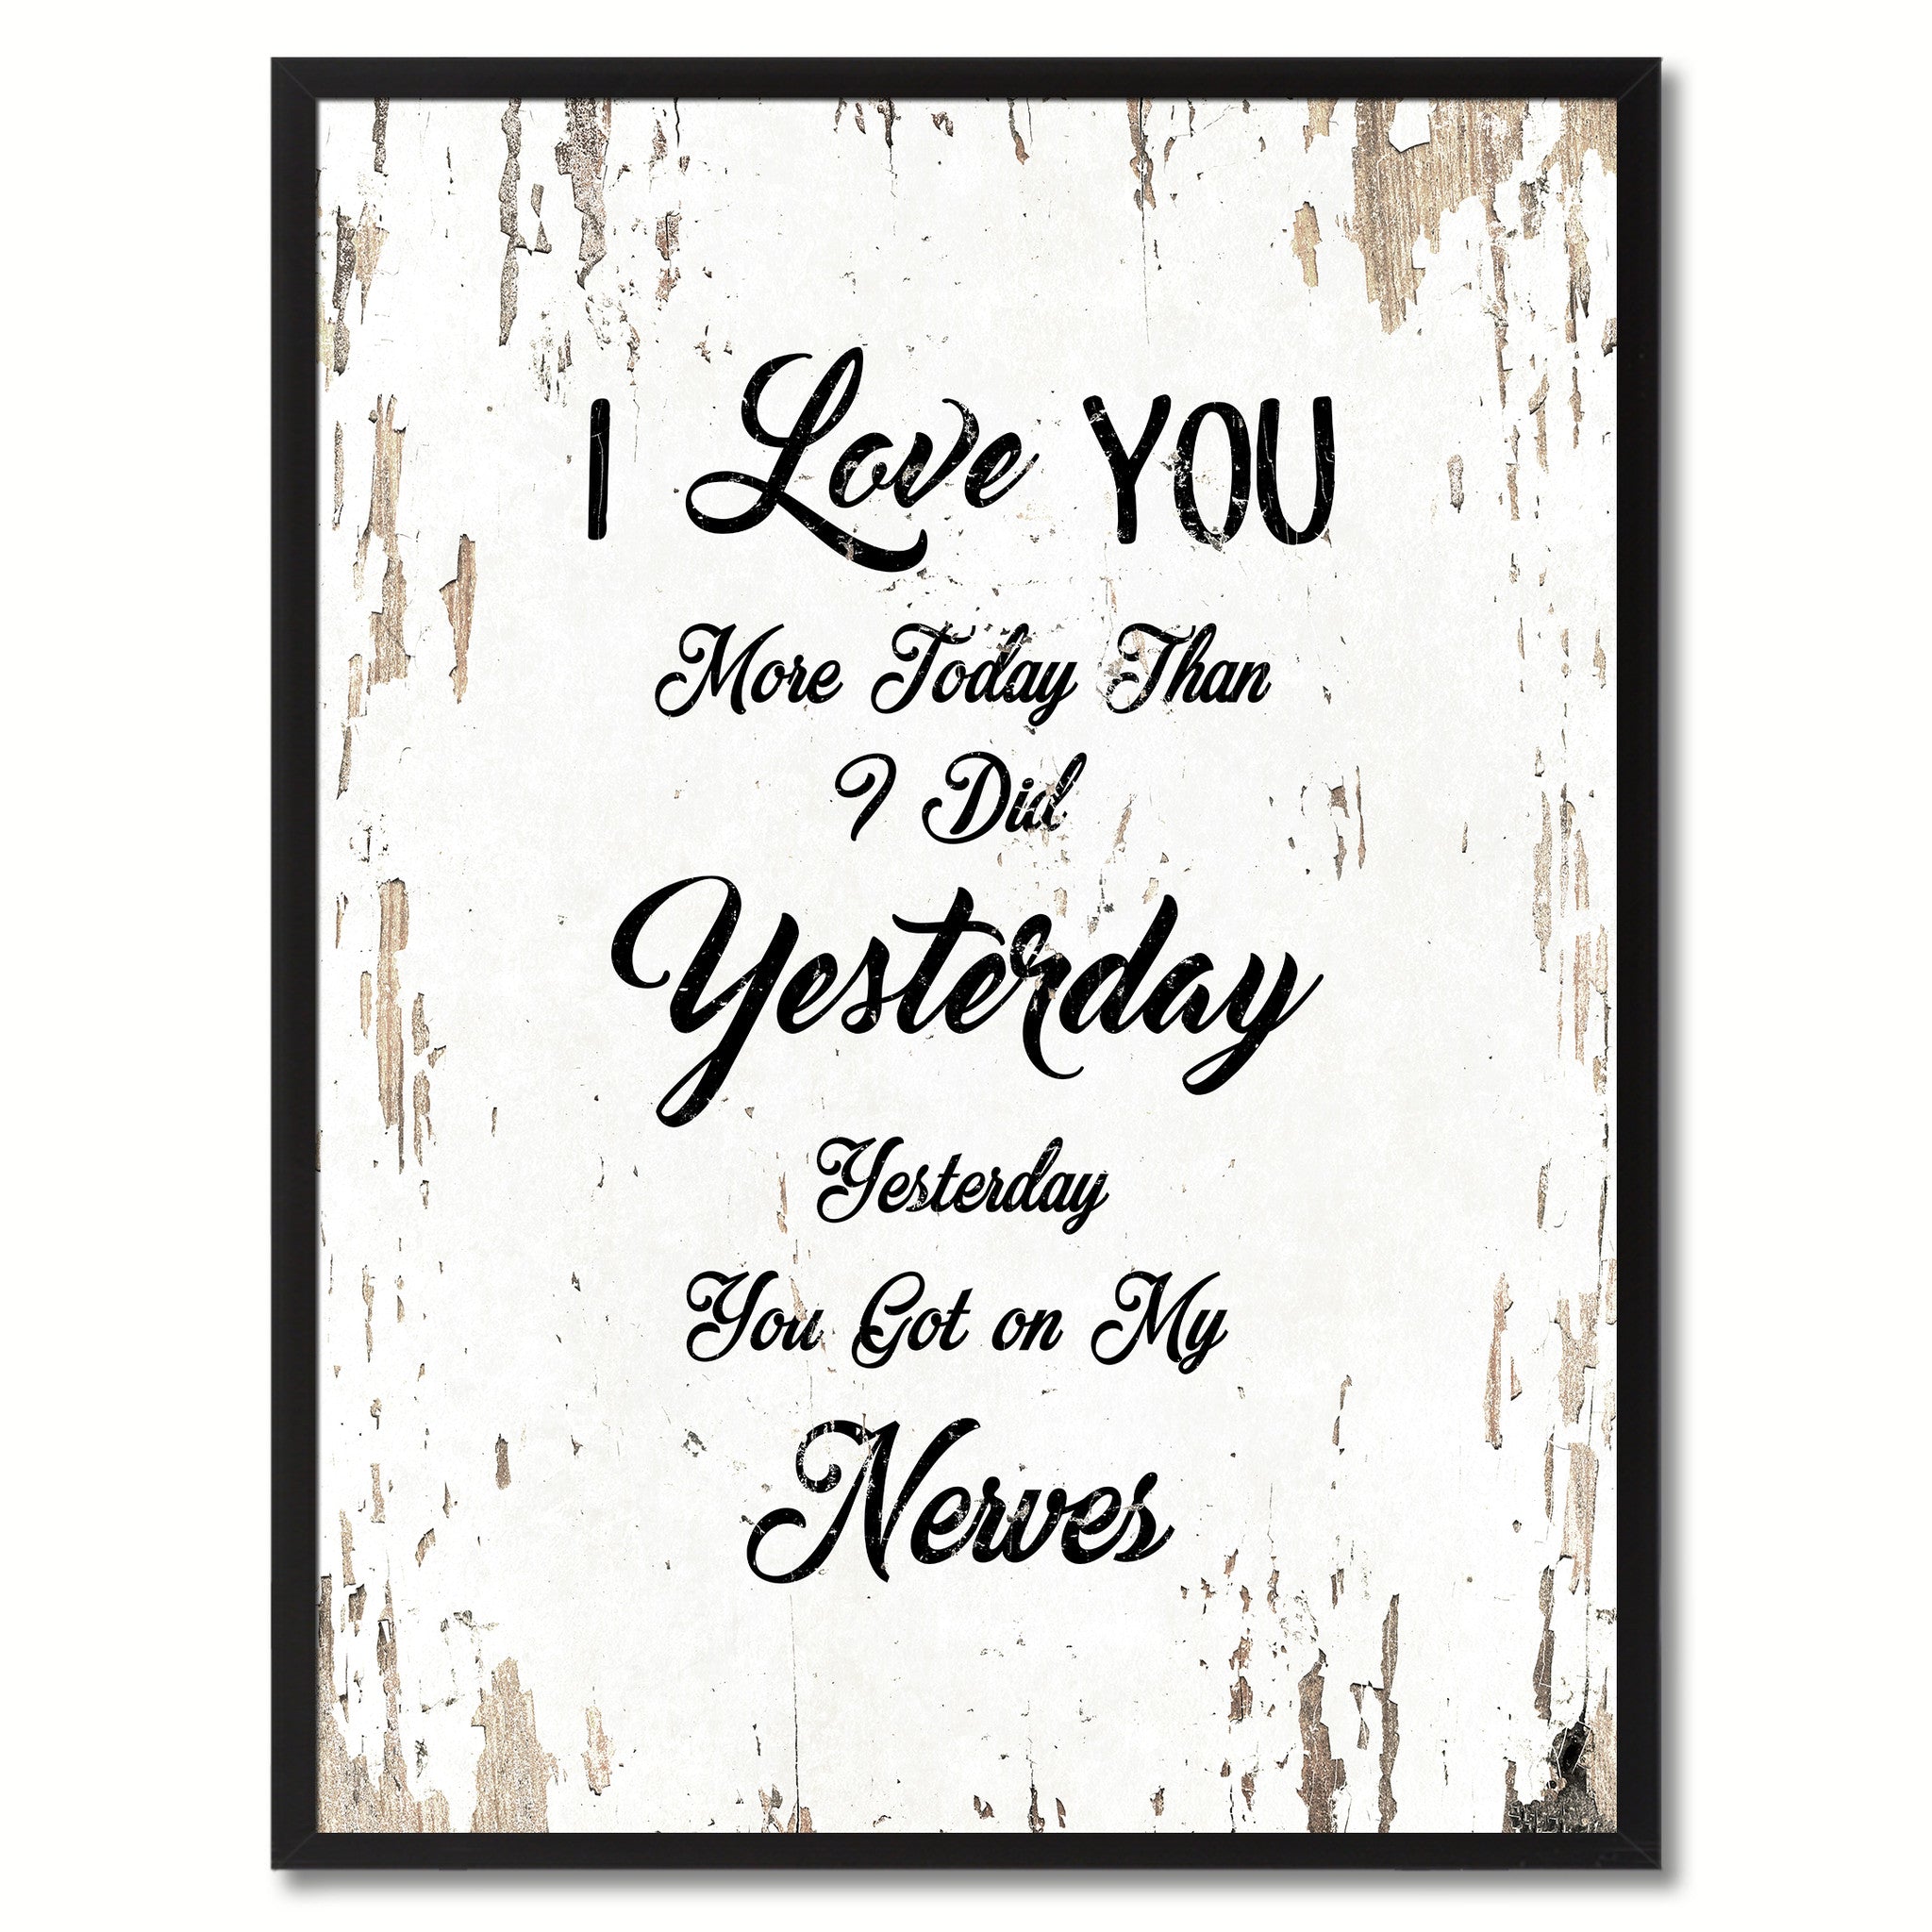 I love you more today than I did yesterday you got on my nerves Inspirational Quote Saying Gift Ideas Home Decor Wall Art